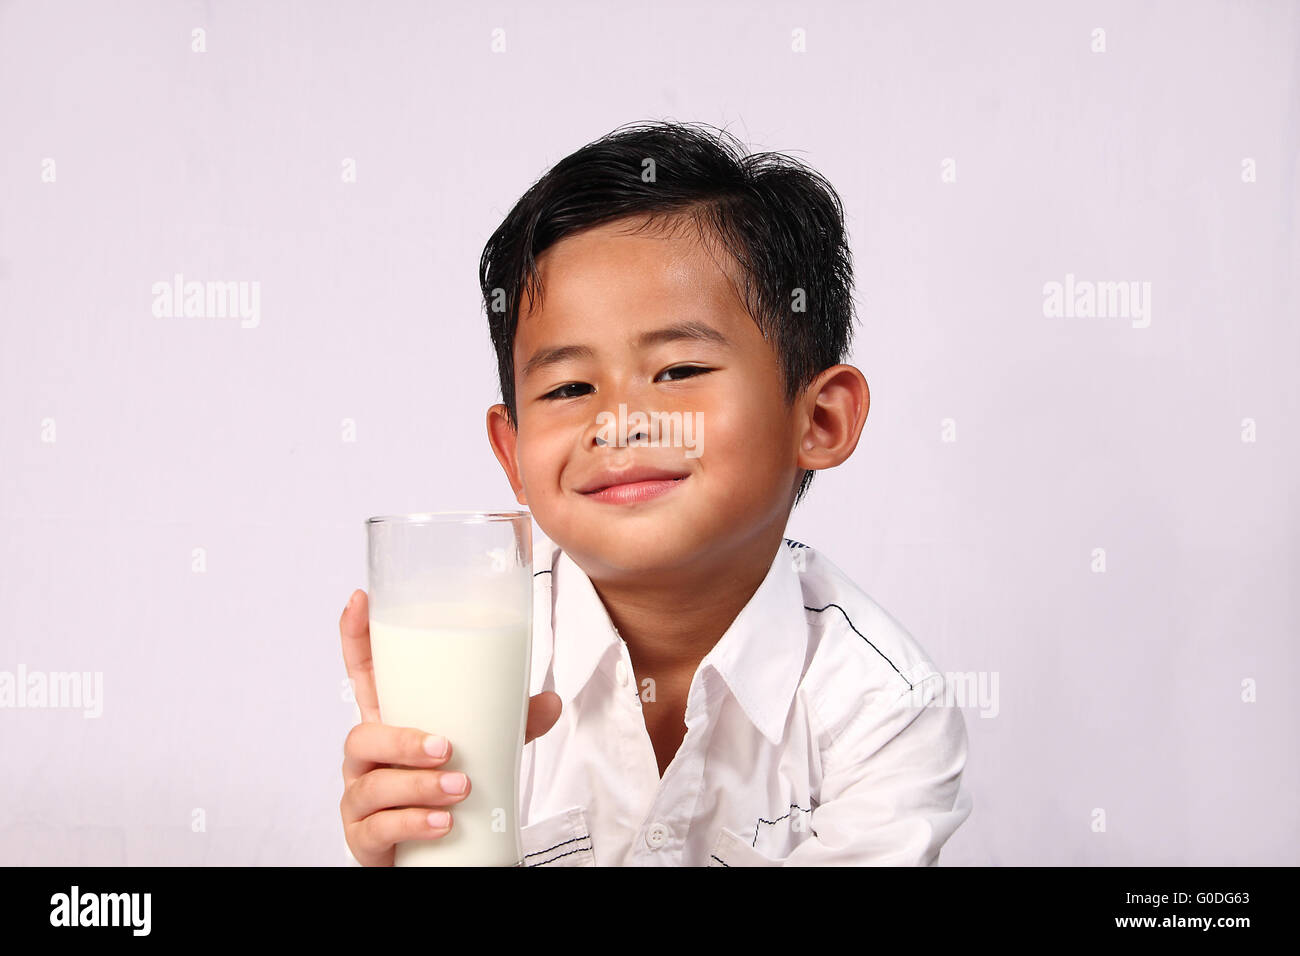 Happy and smiling Asian boy showing a glass of milk Stock Photo